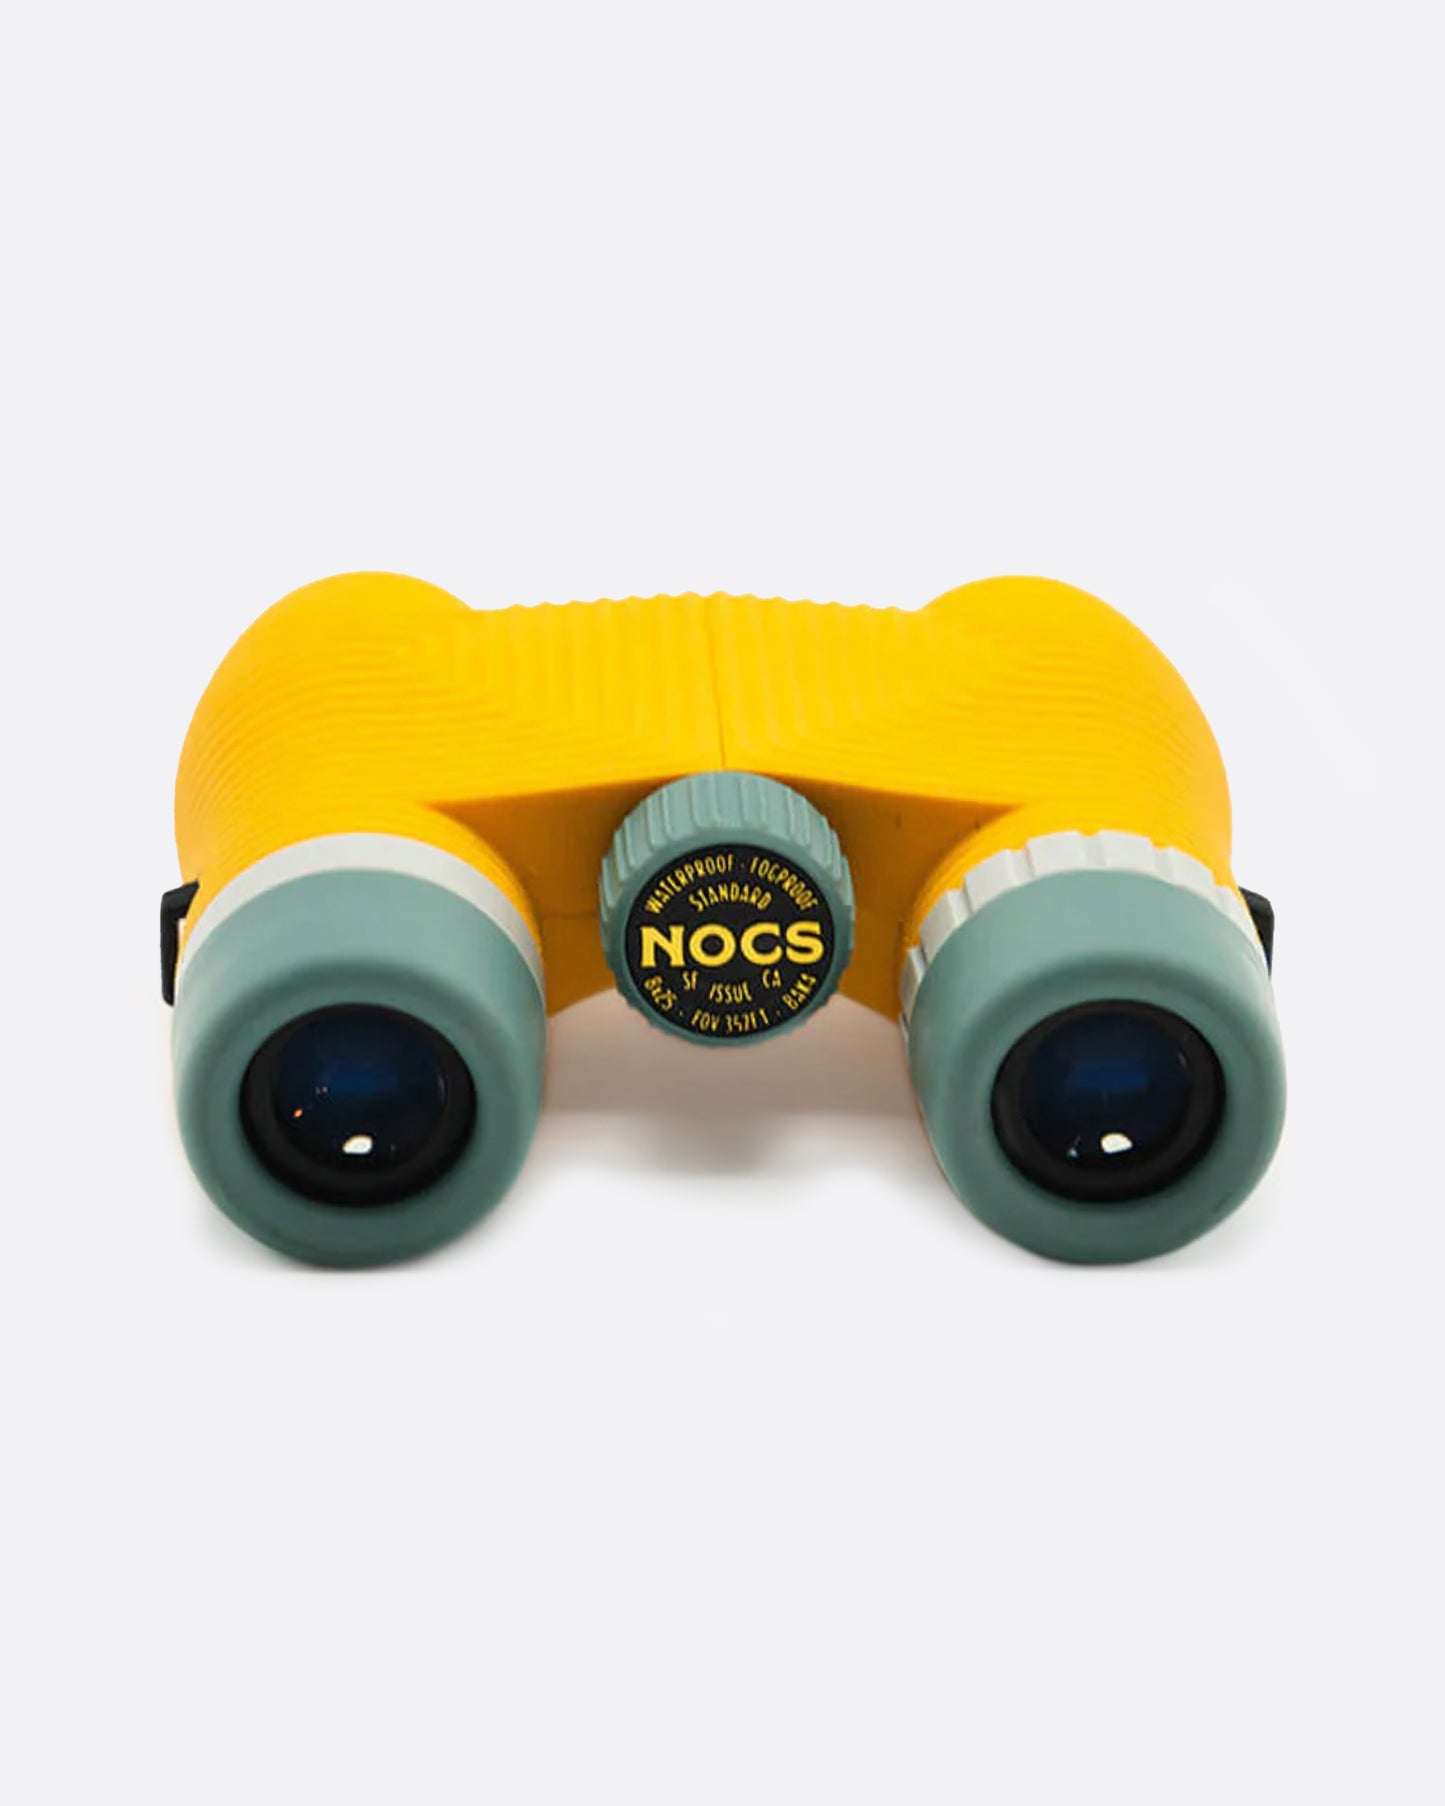 A pair of bright, waterproof binoculars with top shelf optics, designed to be ready for anything.